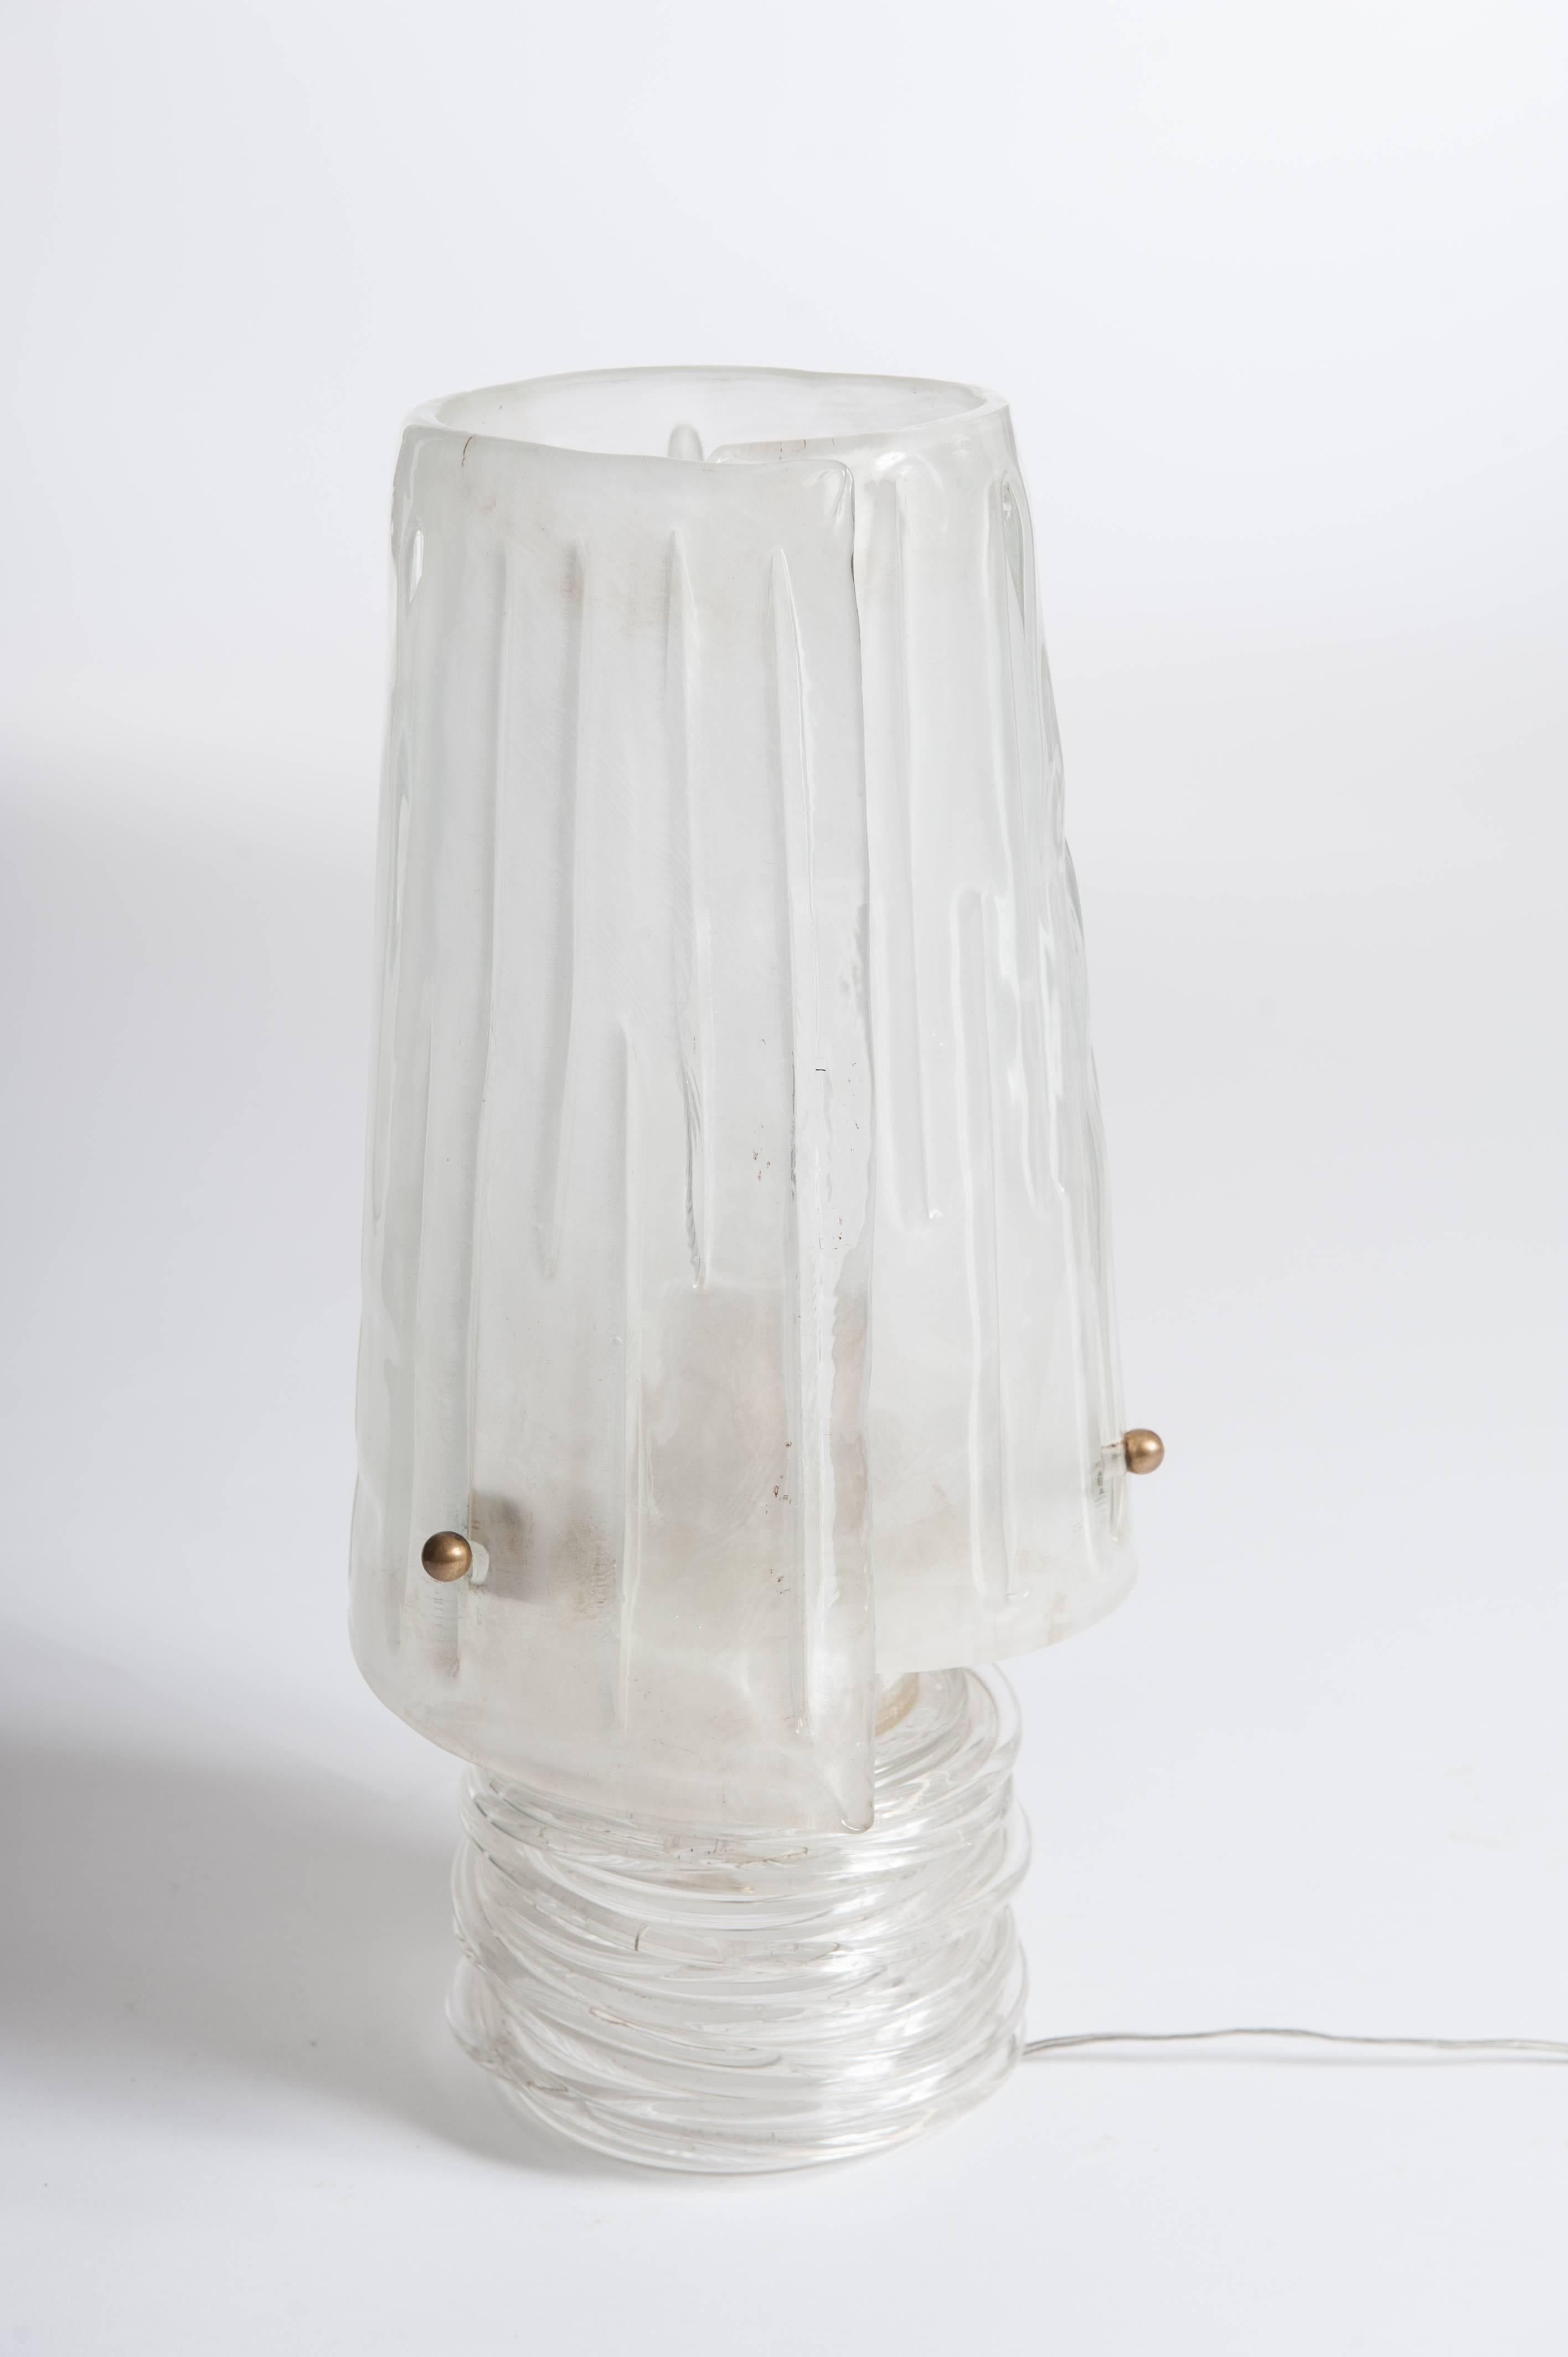 Specially manufactured single piece with clear base worked out of twisted glass layers. 
The translucent shade is reverted like a robe fixed with brass screws.
The transparent glass mass contains fine gold particles which gives the object a very